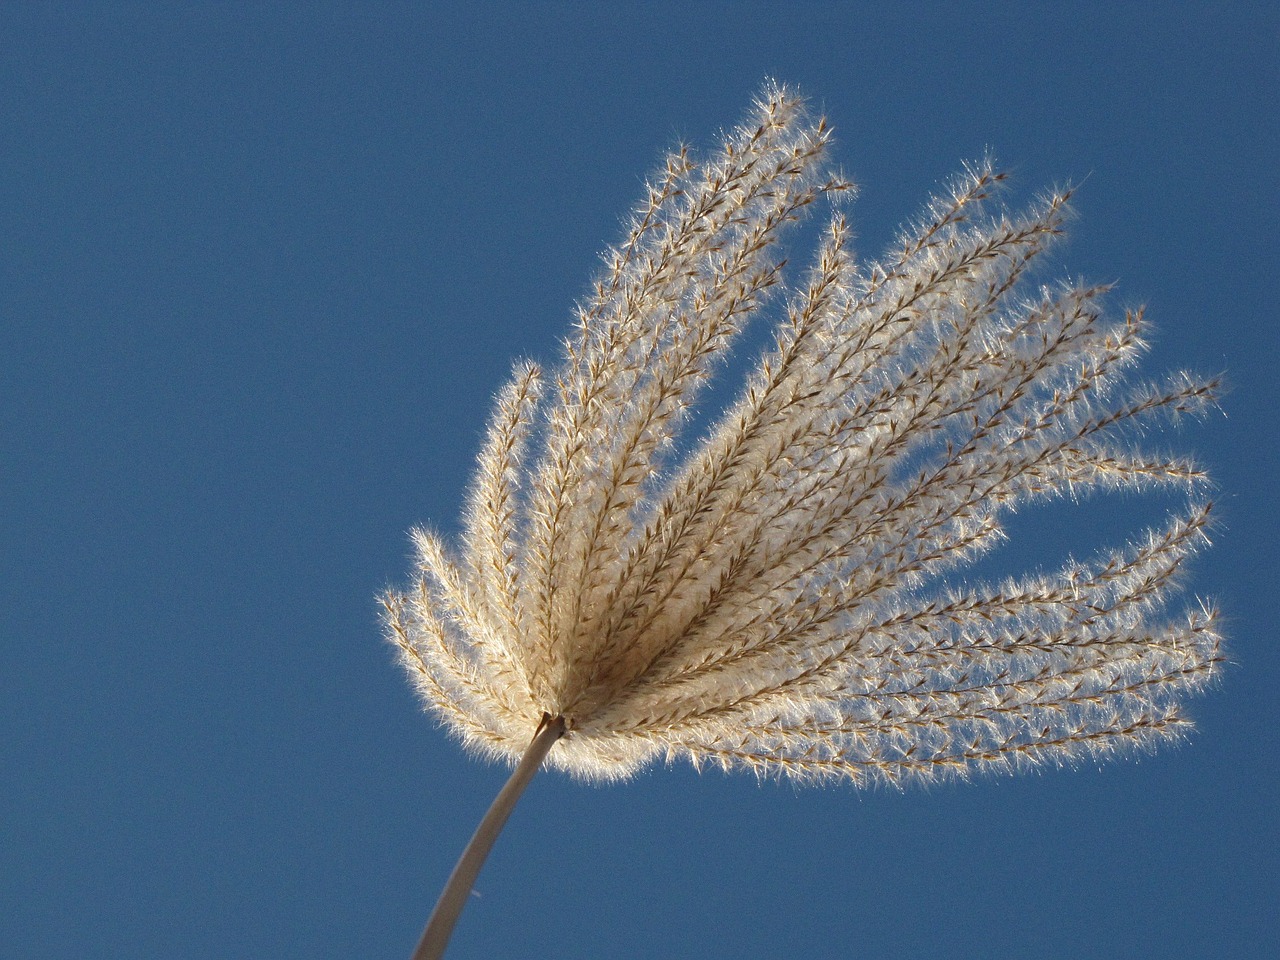 flowering,miscanthus,sky,blue,free pictures, free photos, free images, royalty free, free illustrations, public domain